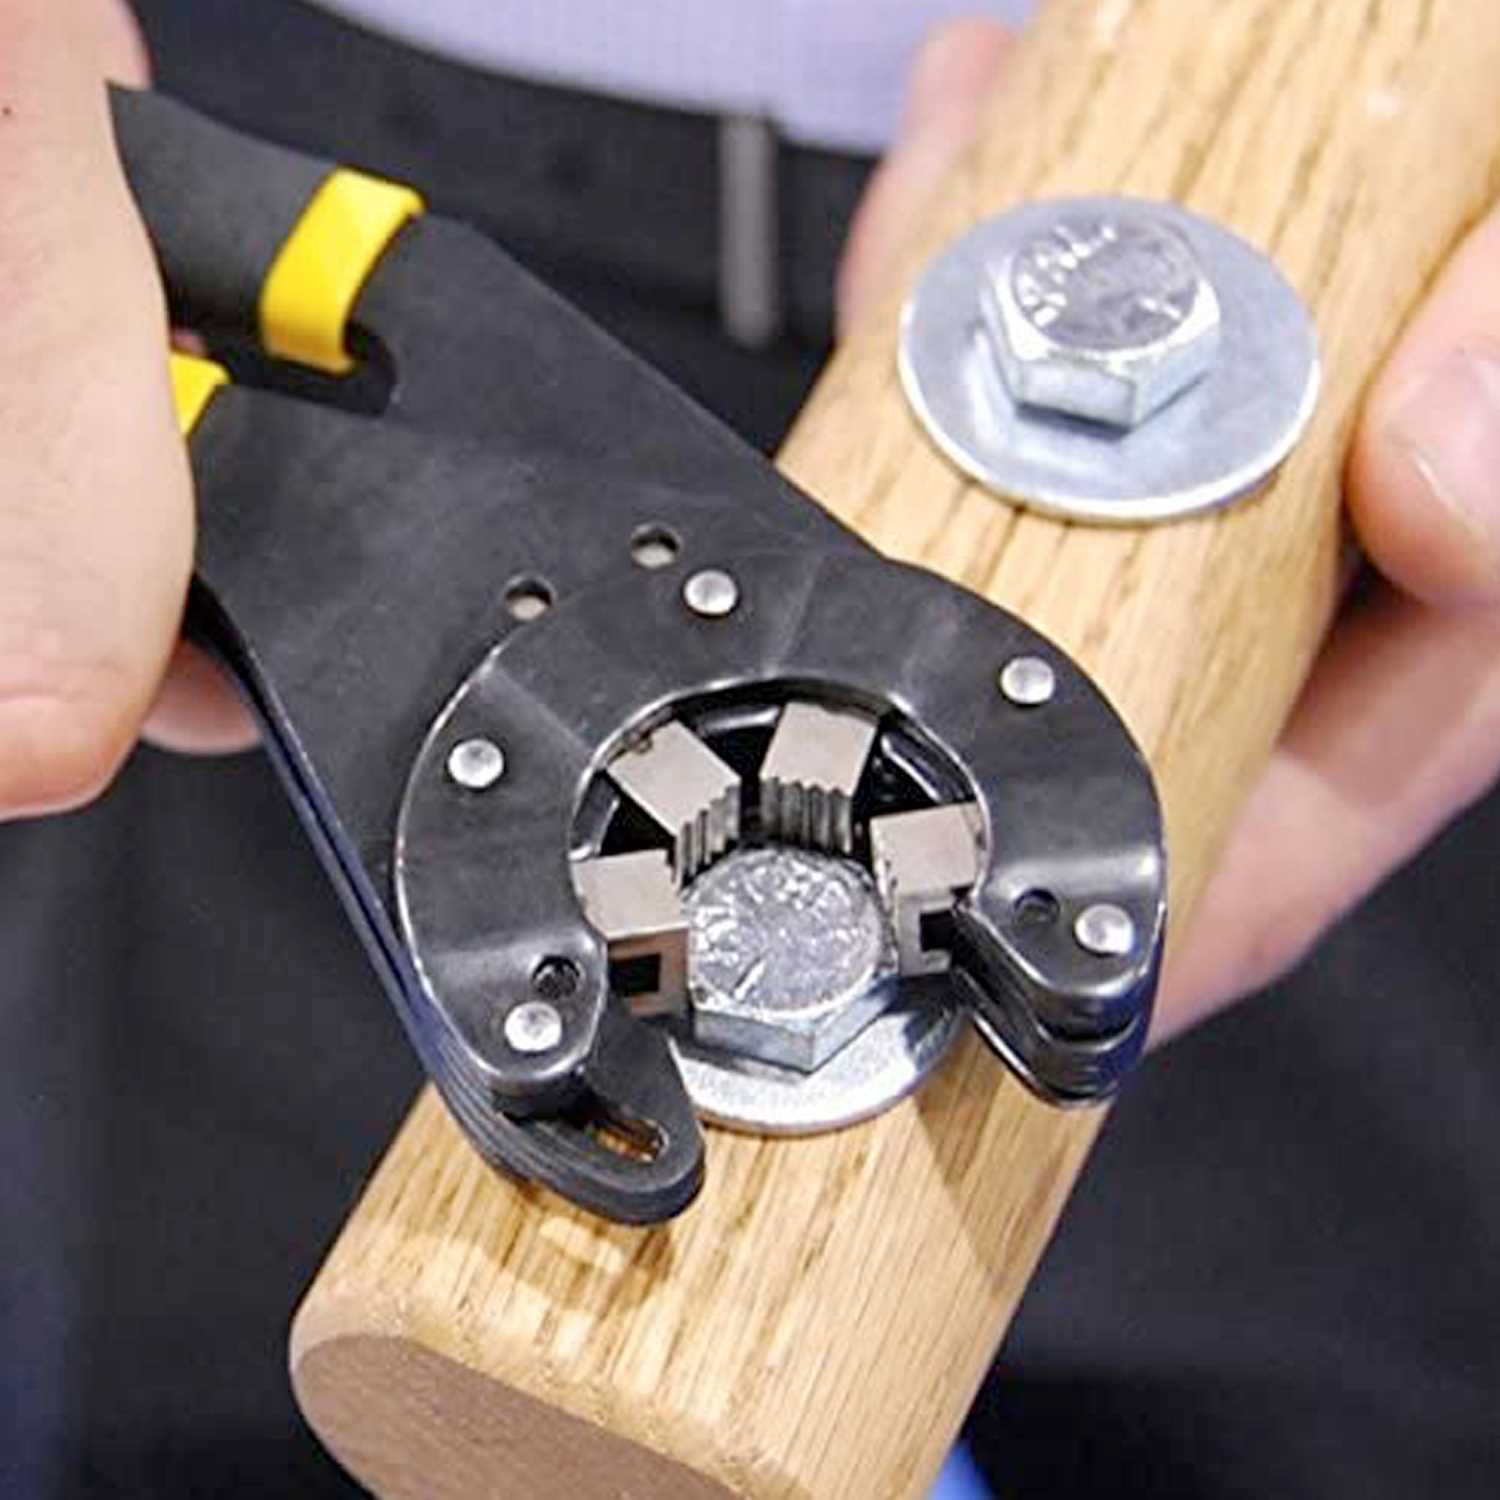 The Bionic Grip 14-in-1 Adjustable Wrench Wood Bolts - Father’s Day Gifts For Dad Who Wants Nothing